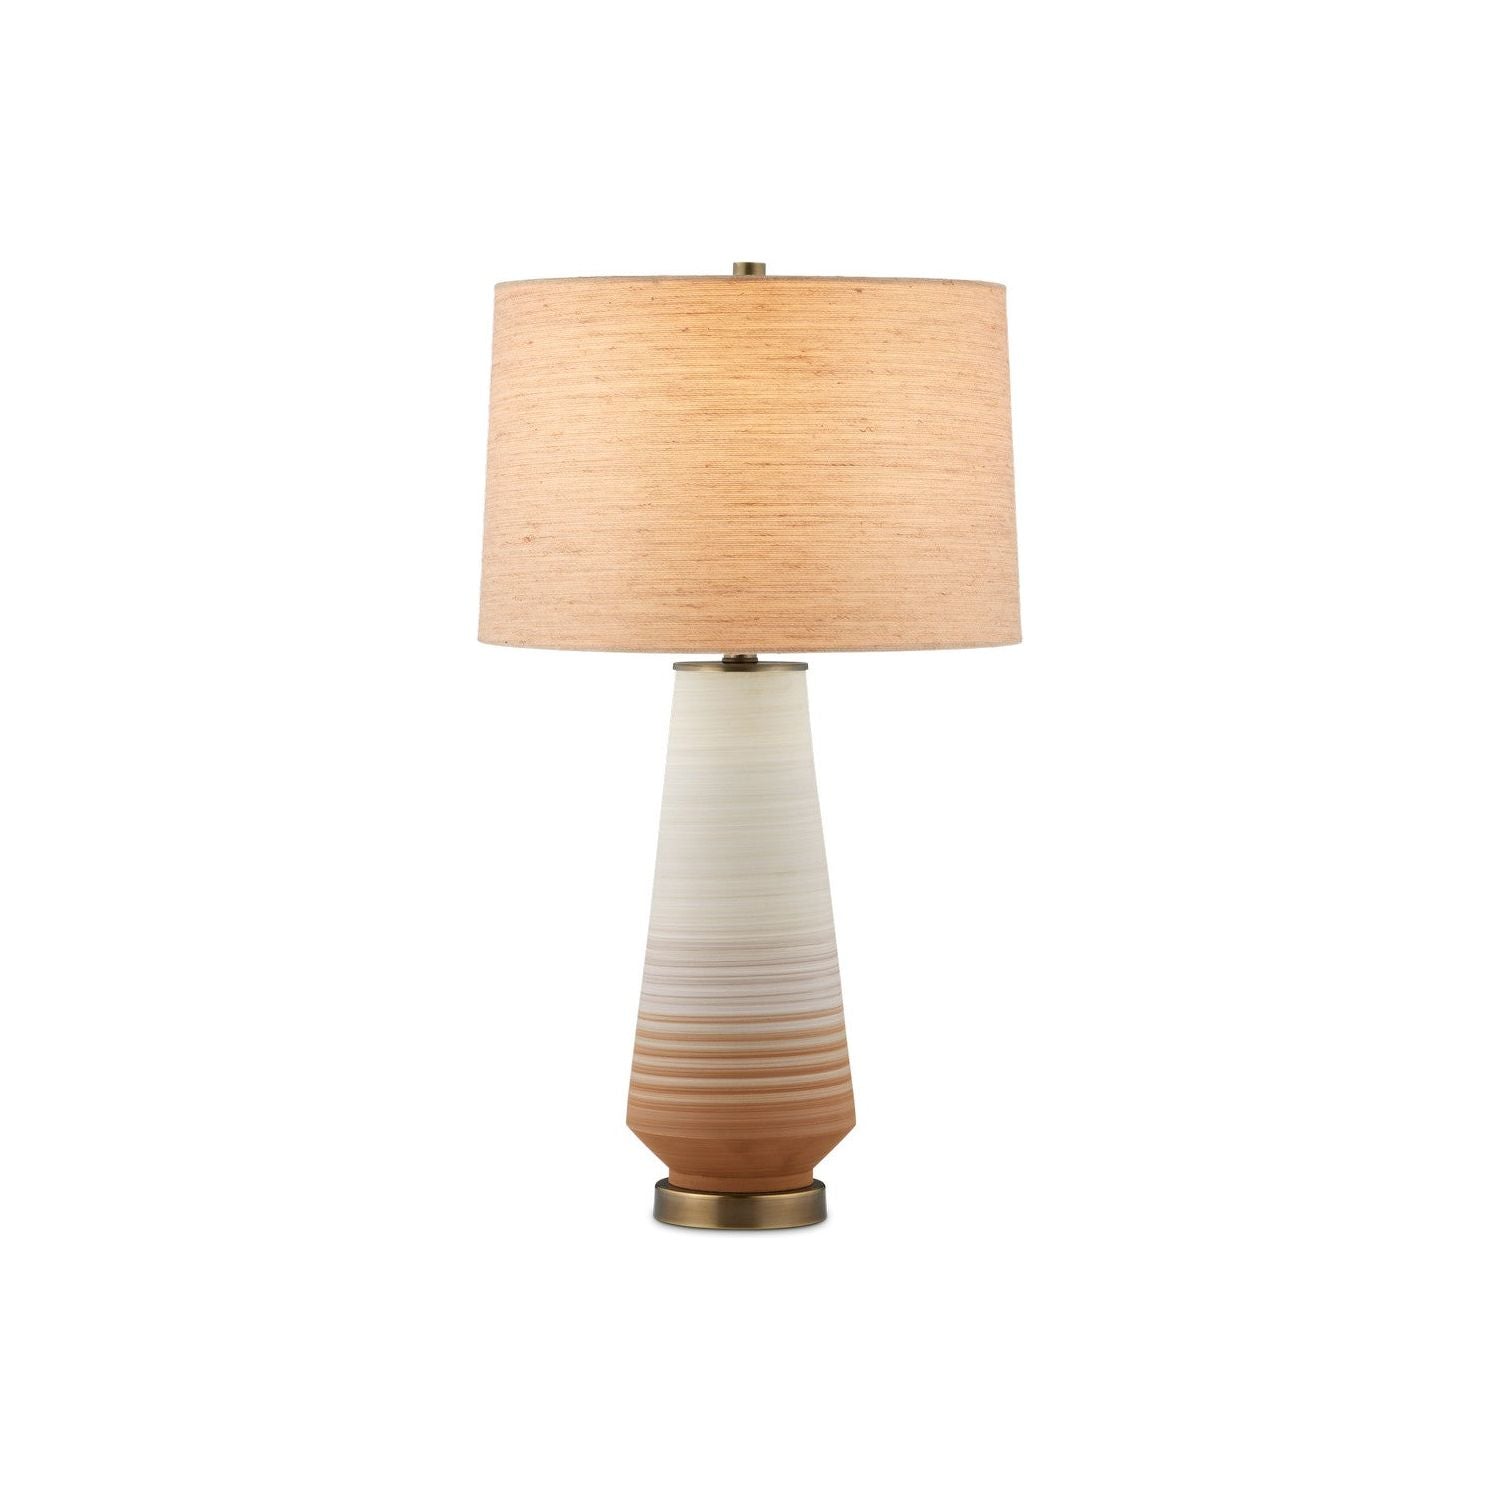 Currey and Company - 6000-0940 - One Light Table Lamp - Beige/Pale Gray/Brown/Antique Brass